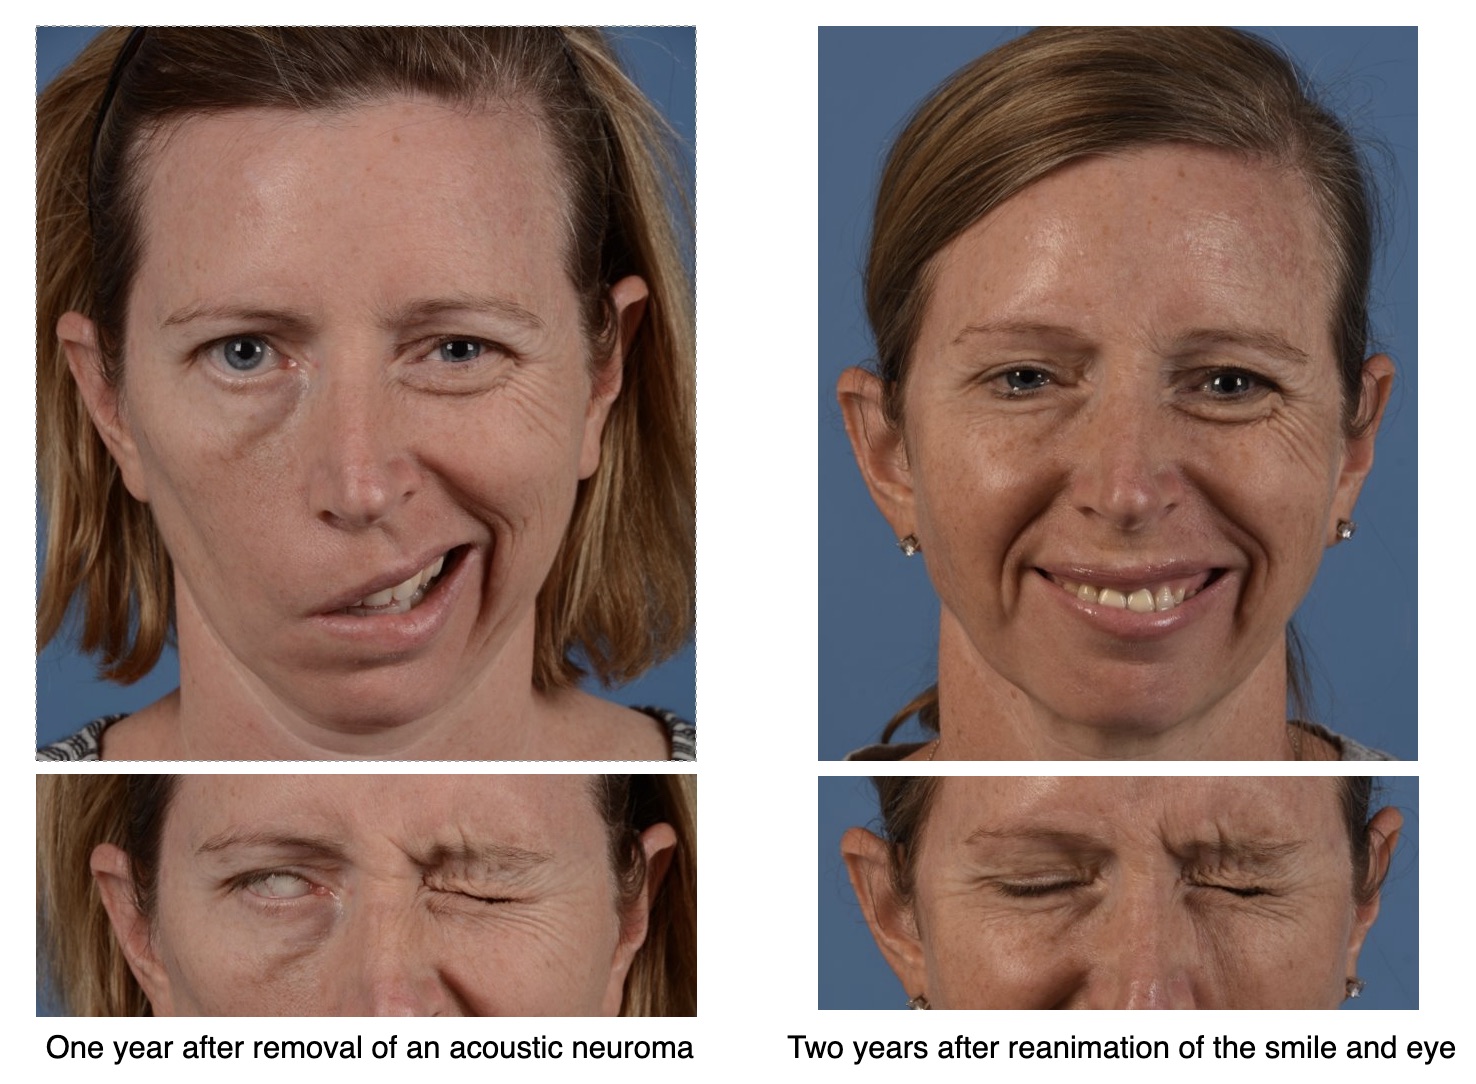 Above are before and after surgery photos of a 44-year-old patient following removal of an acoustic neuroma. She did not have the ability to smile or close her eyes voluntarily. Two years after surgical reanimation for the midface and the eye, she attained symmetry in her smile and the ability to close her eye voluntarily.